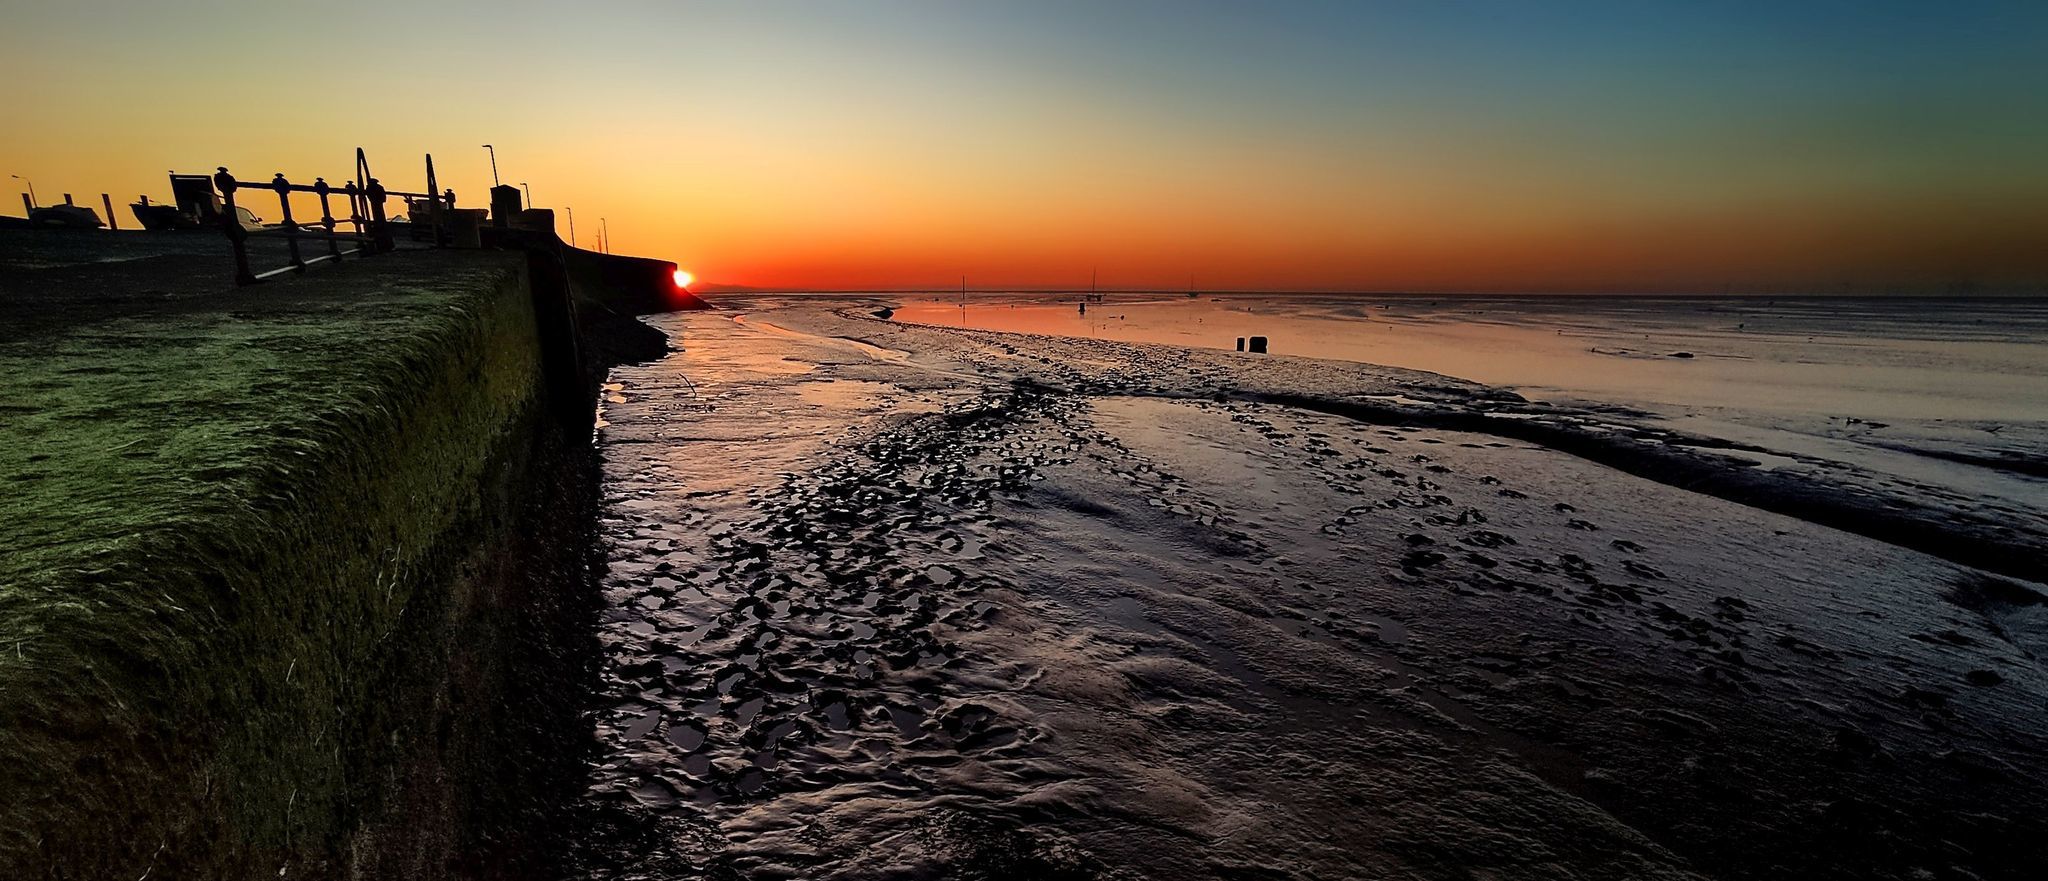 Sunset from Meols slipway by Phil Coalter